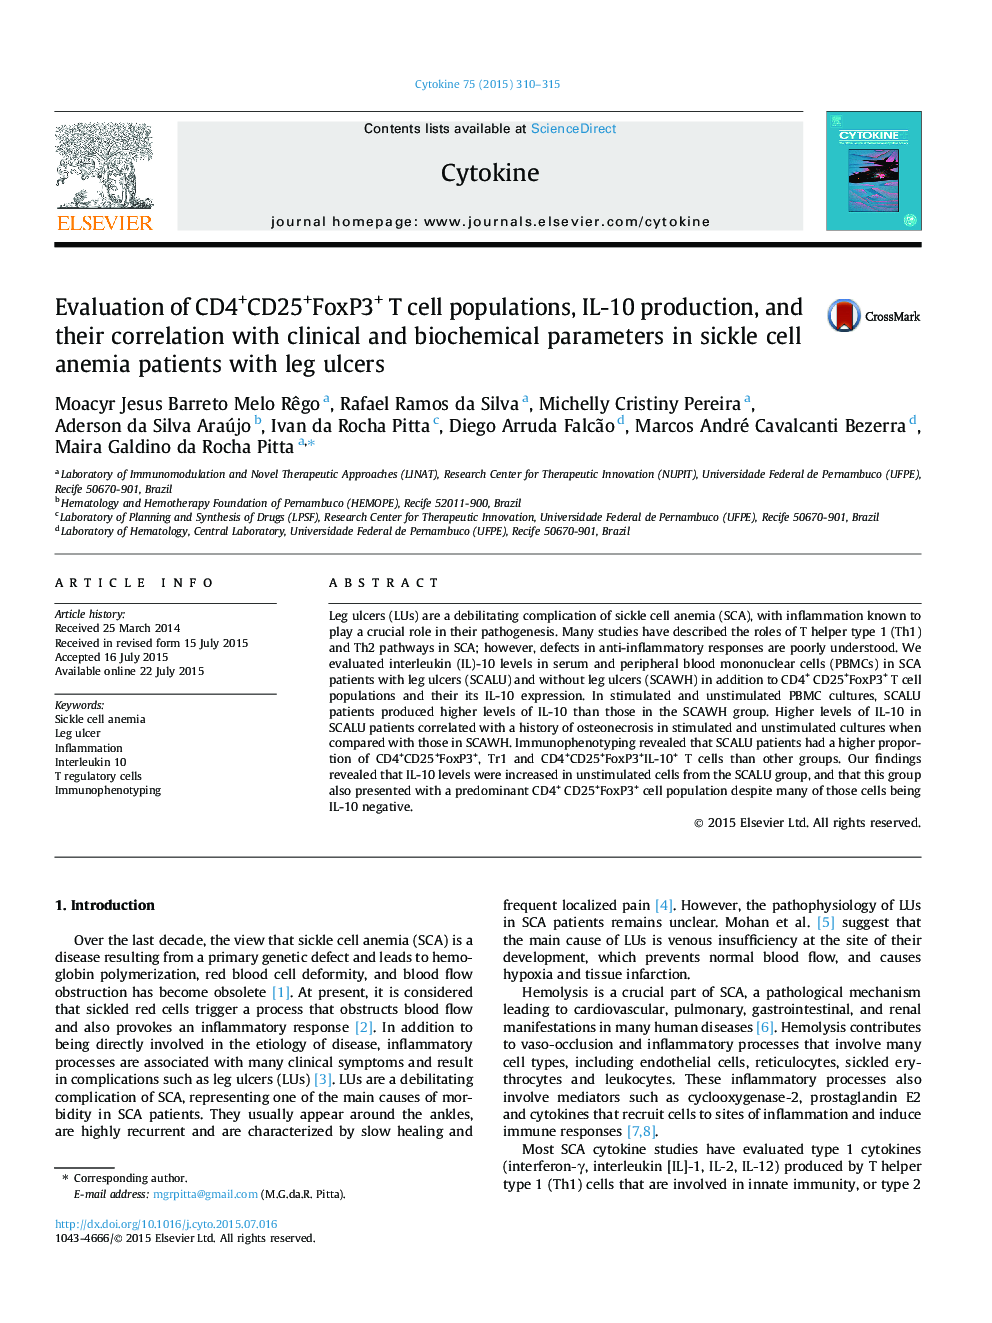 Evaluation of CD4+CD25+FoxP3+ T cell populations, IL-10 production, and their correlation with clinical and biochemical parameters in sickle cell anemia patients with leg ulcers